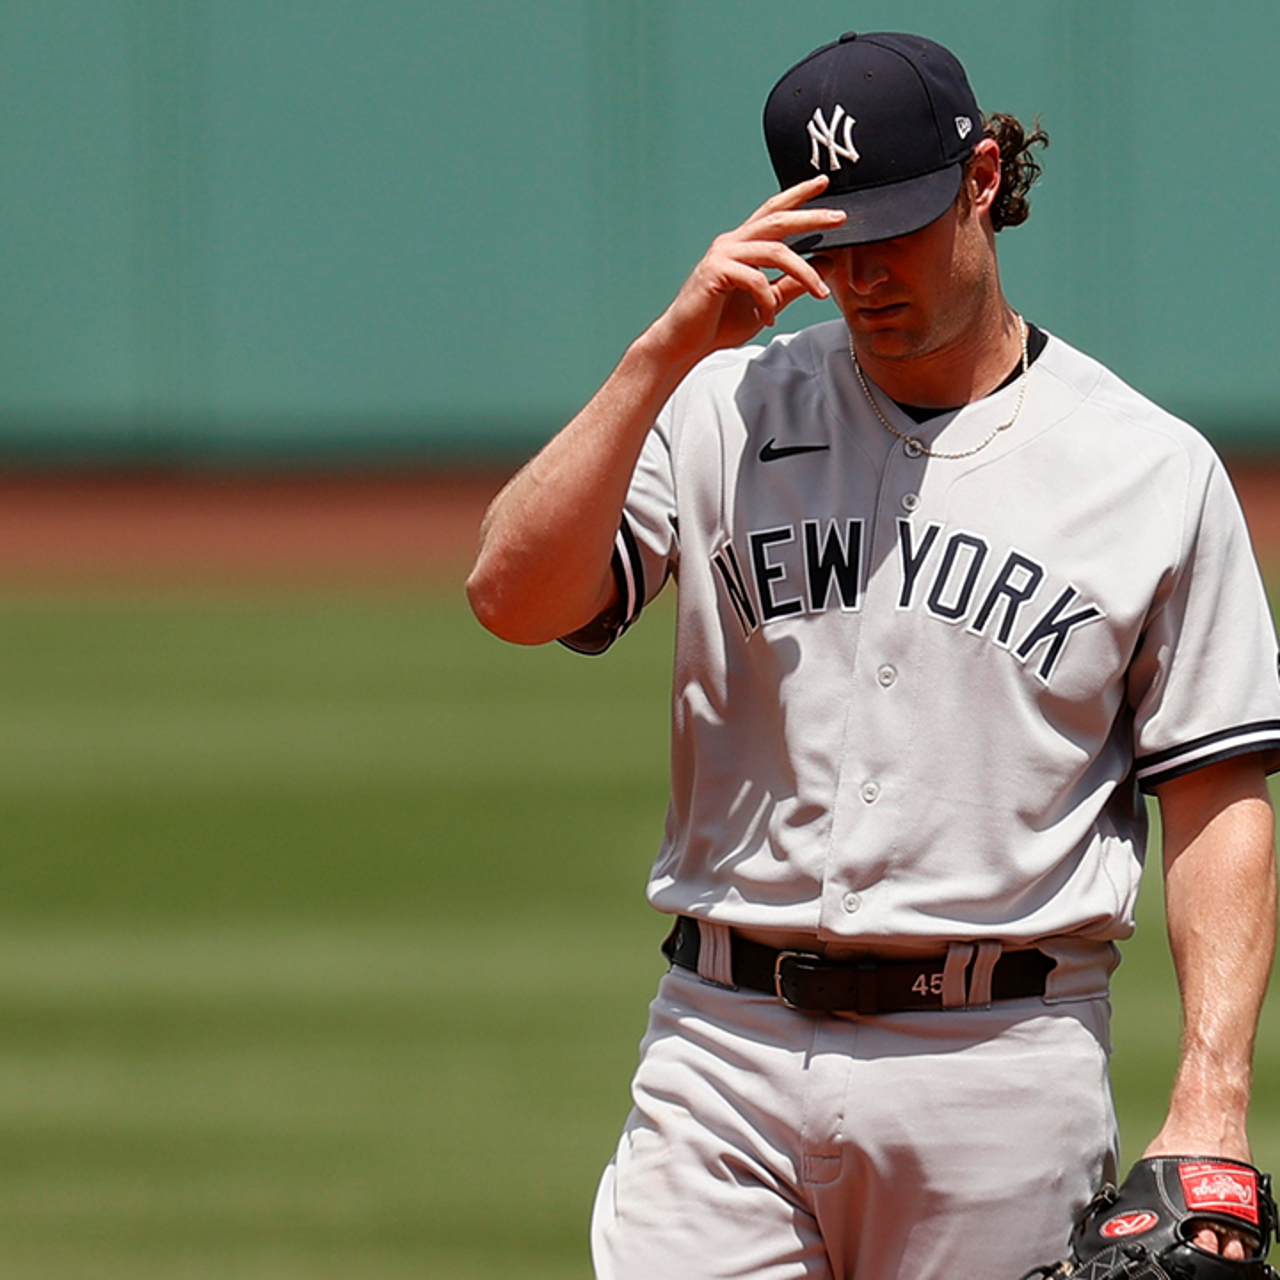 Nick Swisher on Gerrit Cole, 'if he doesn't pitch well the Yankees aren't  going anywhere